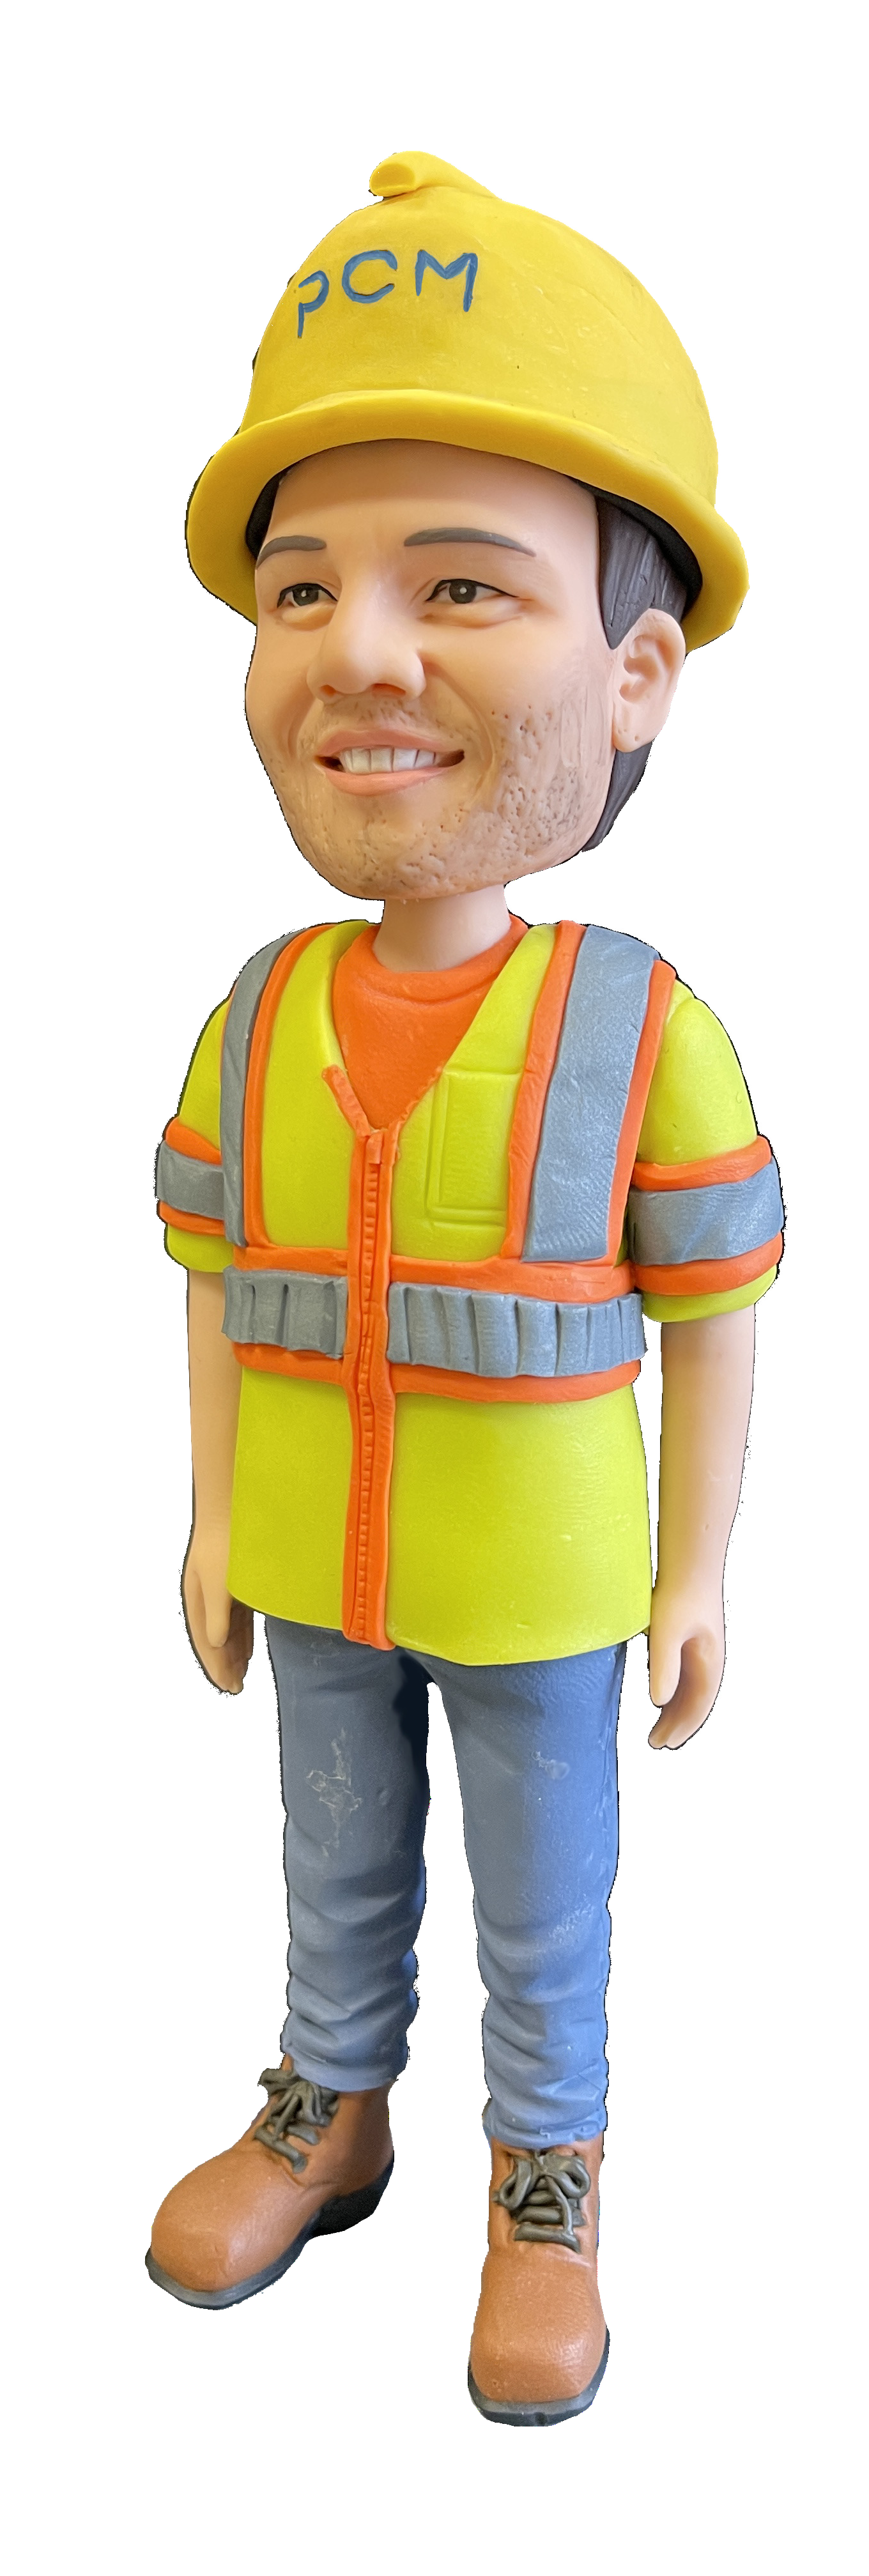 PCM Action Figure - Rockway Peninsula, NY - PCM Contracting Corp